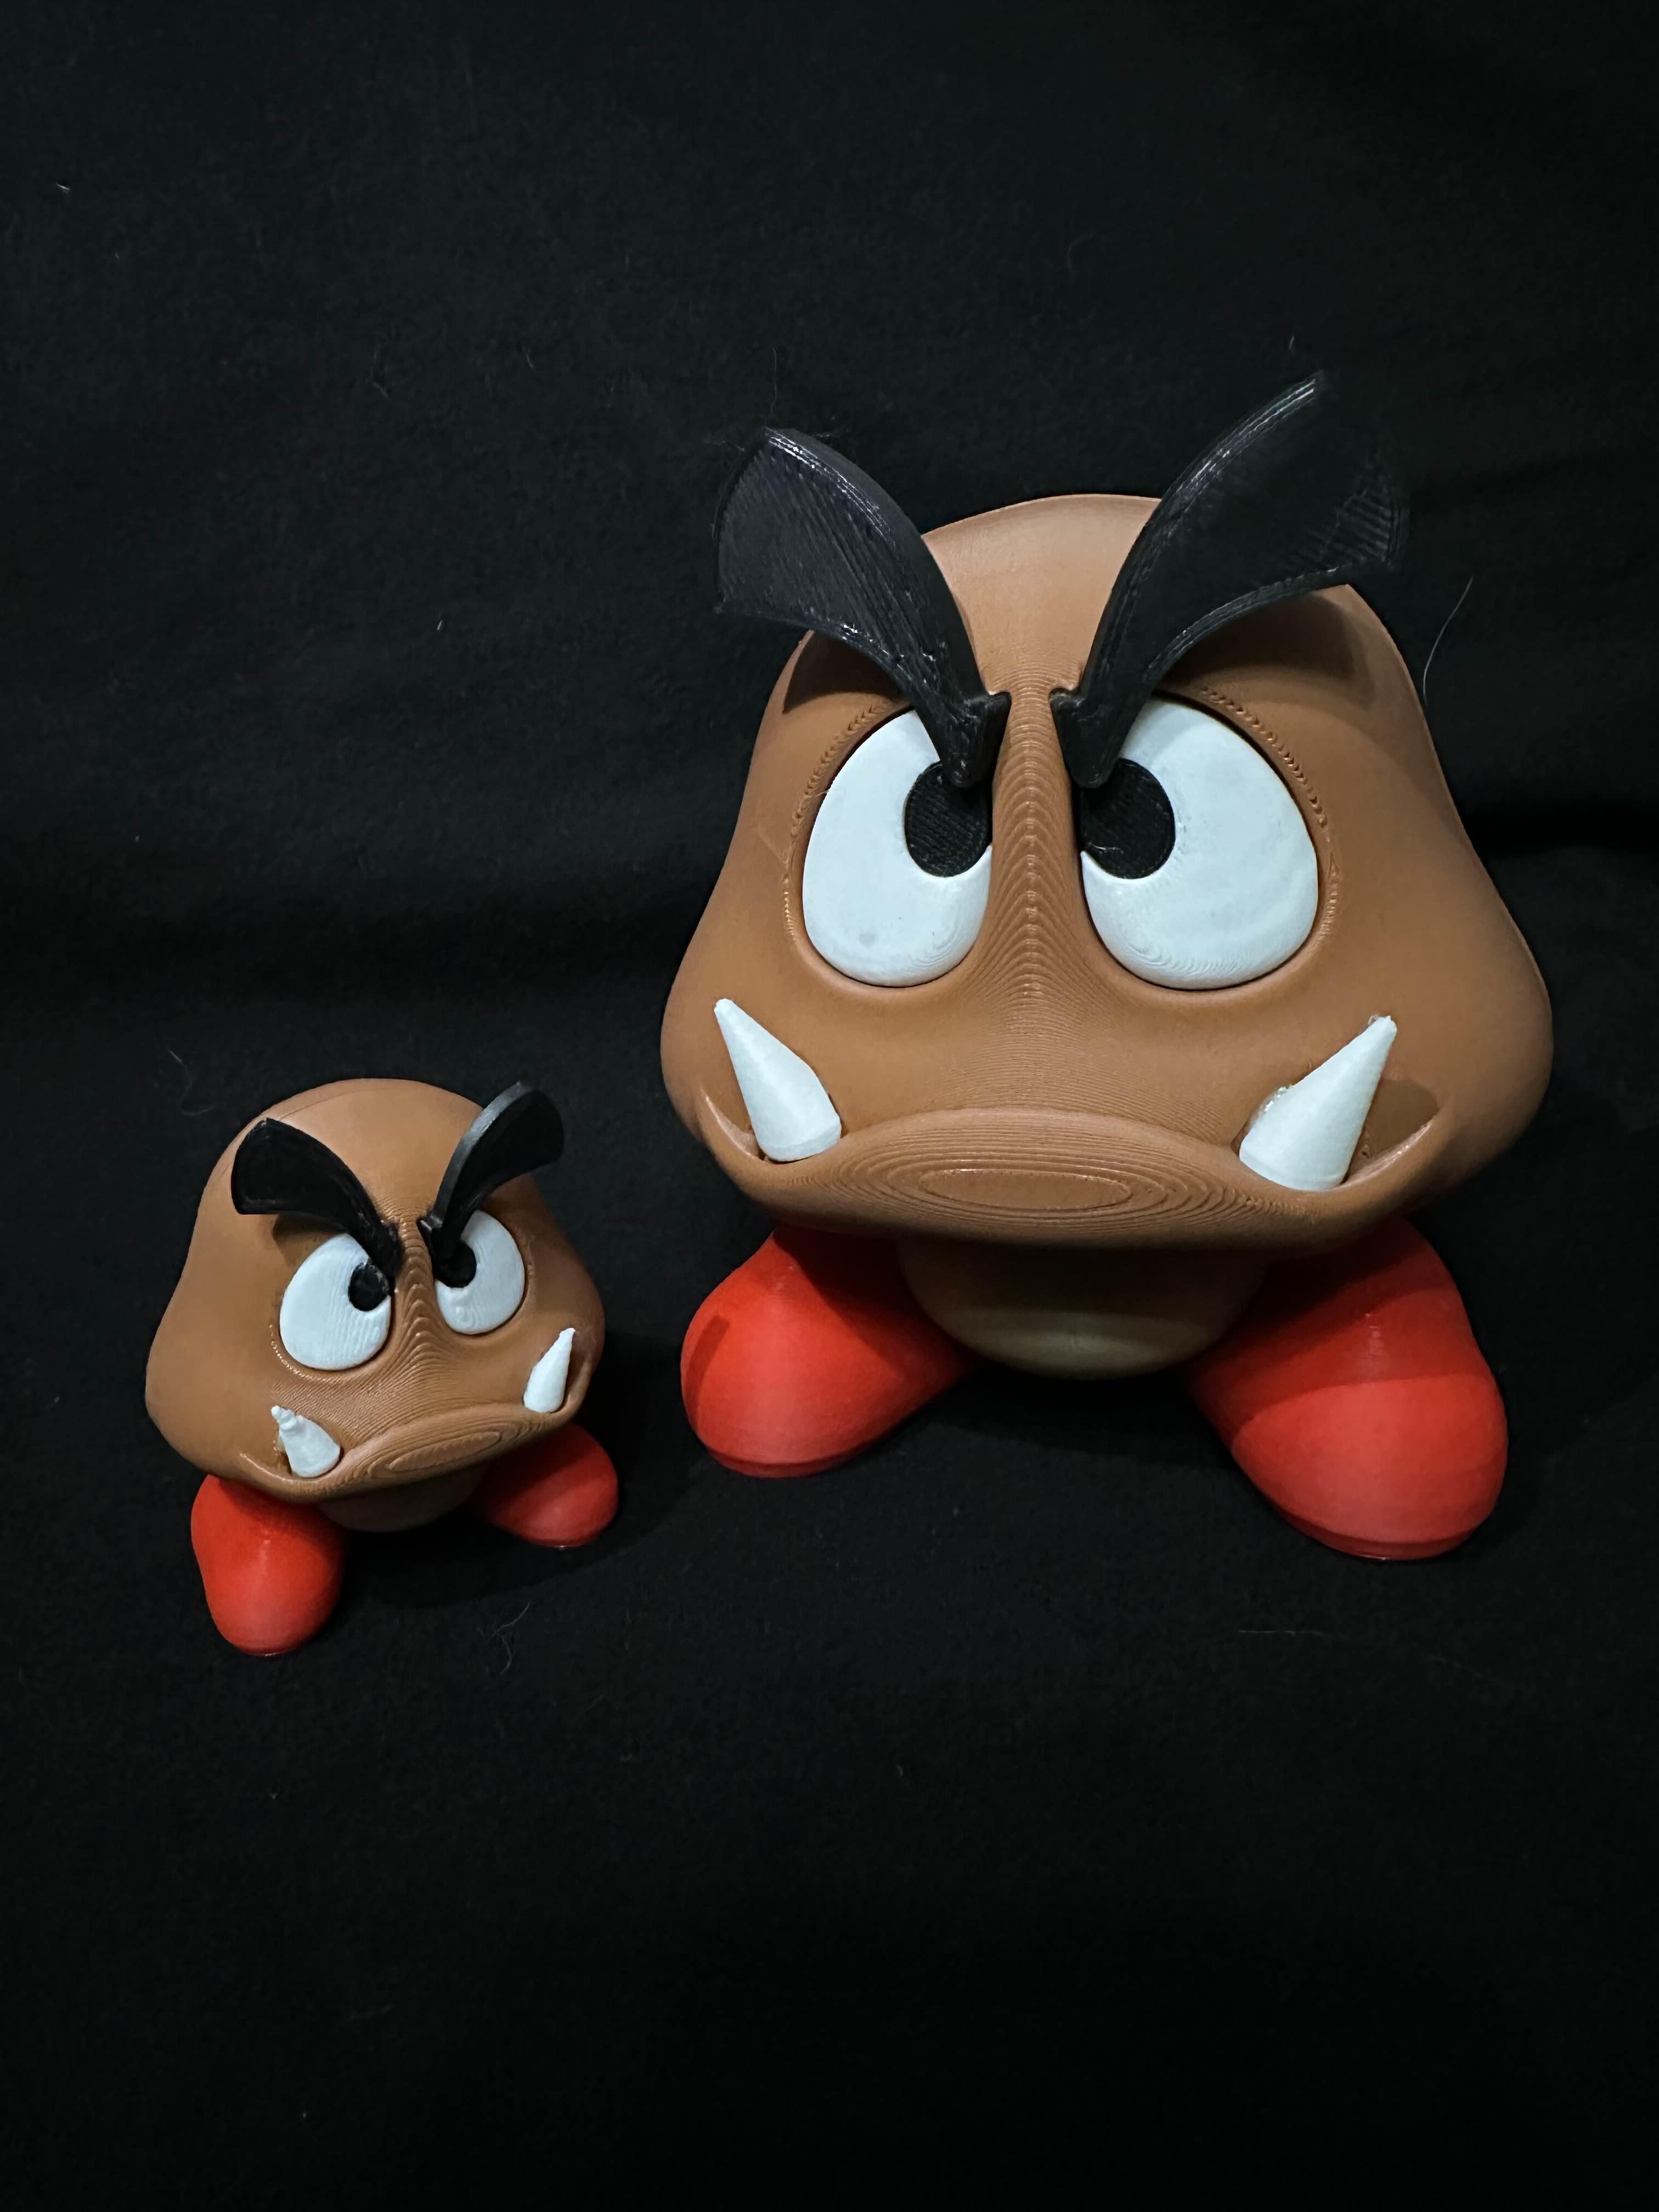 Paper Goomba – Multi Part - One at 100%, the other at 200%. Love the model. - 3d model